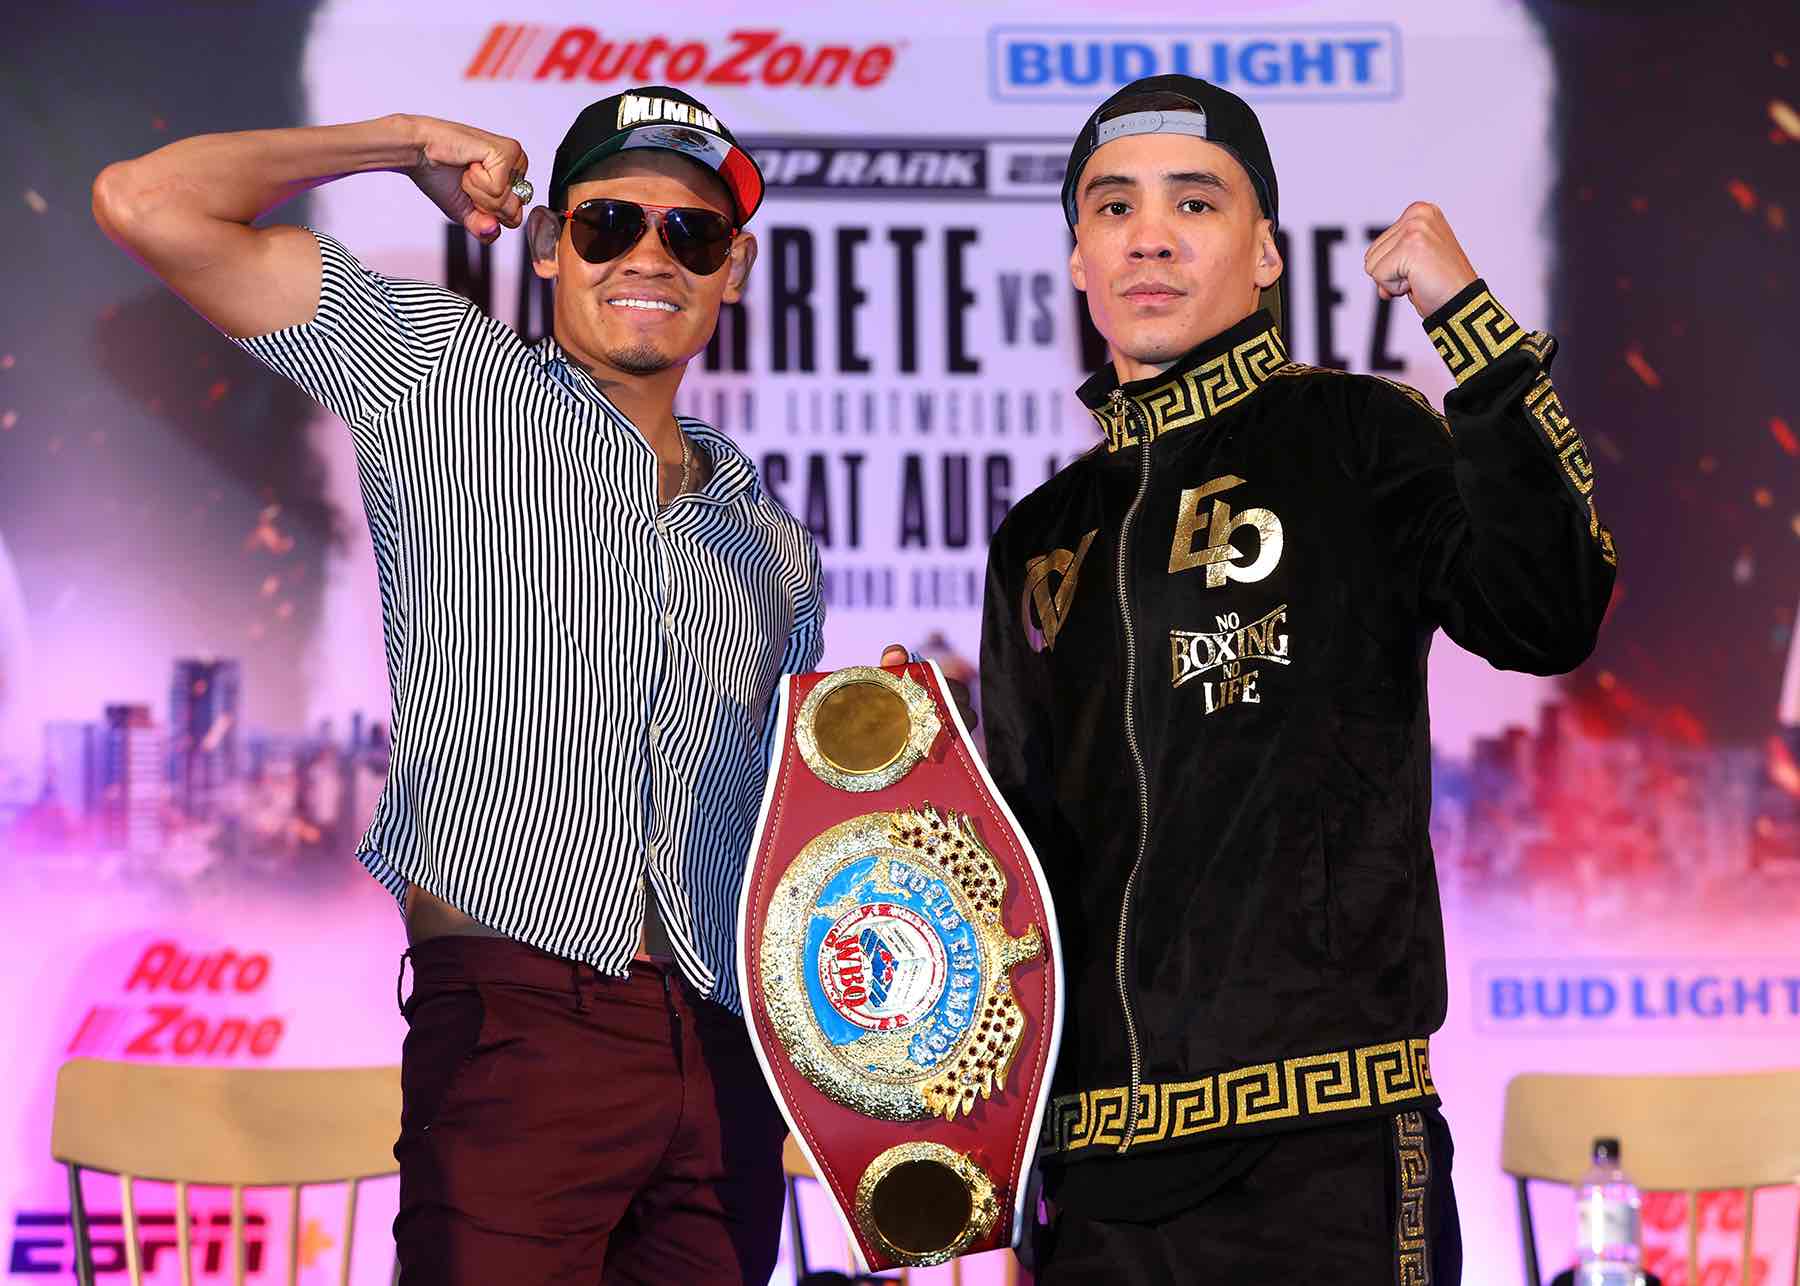 Emanuel Navarrette appears to feel the pressure as world title defense against Oscar Valdez rapidly approaches